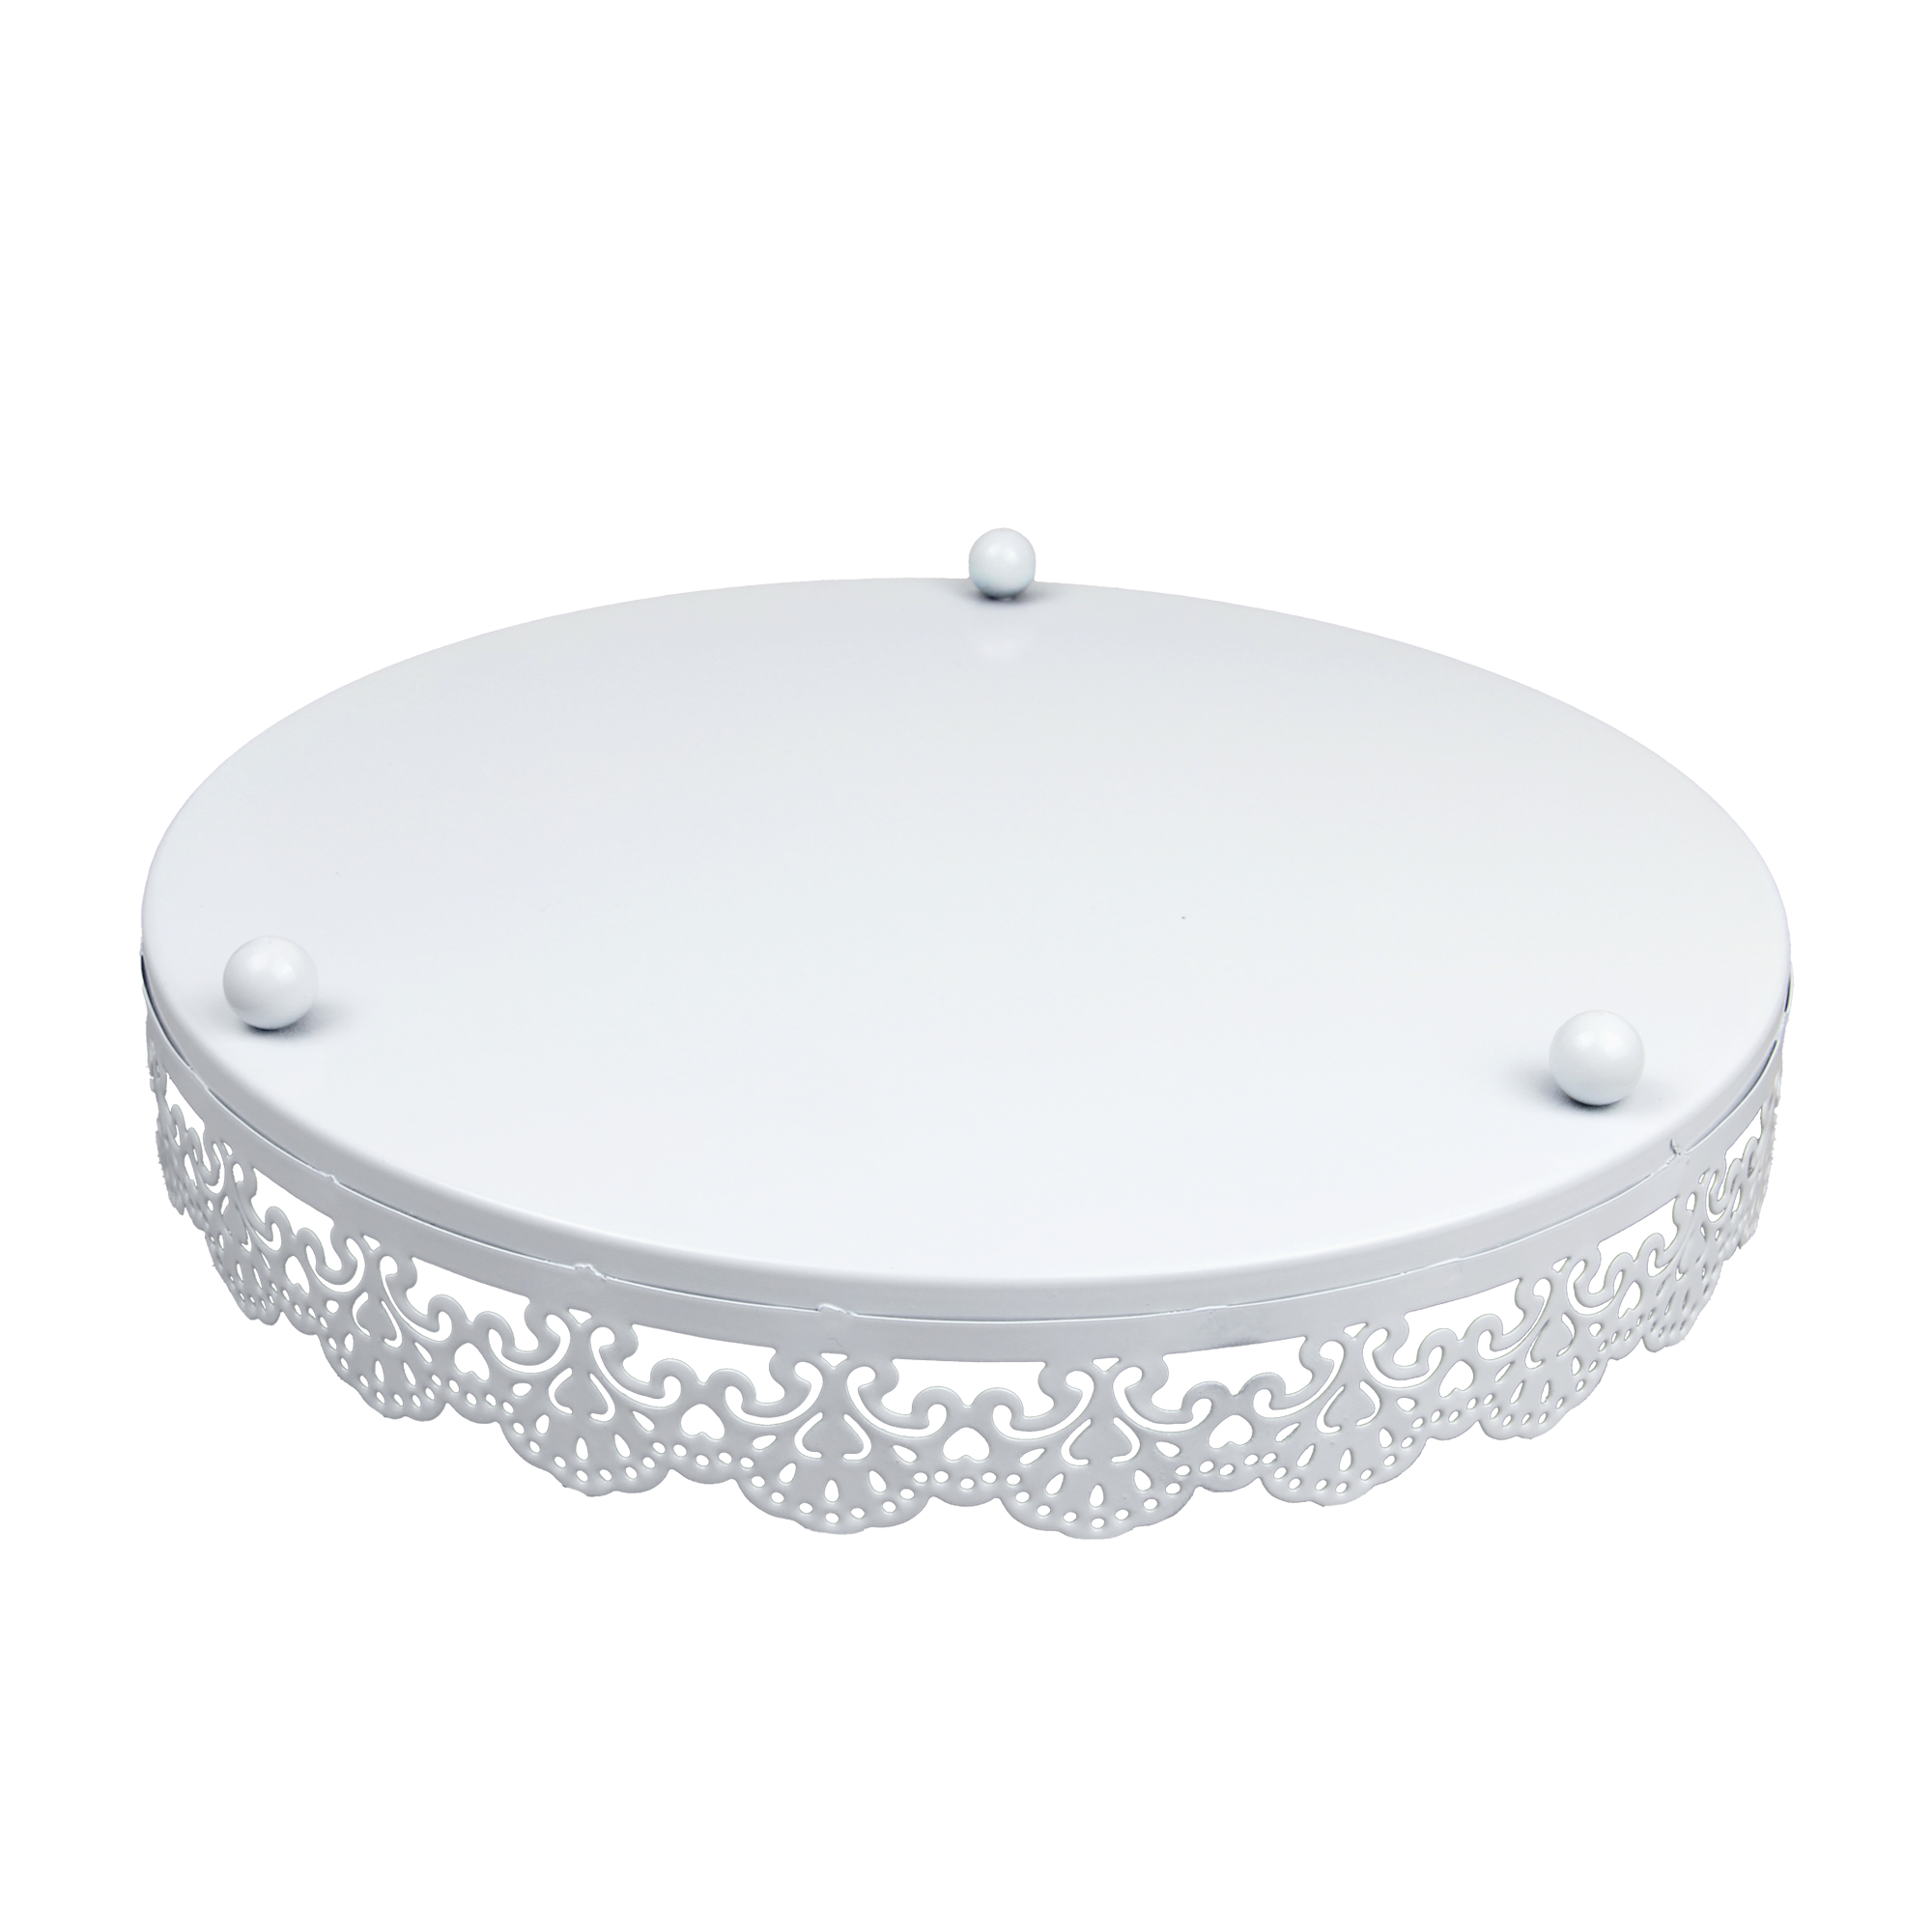 HB0989F 10"Metal Cake/Cupcake Stand in white color